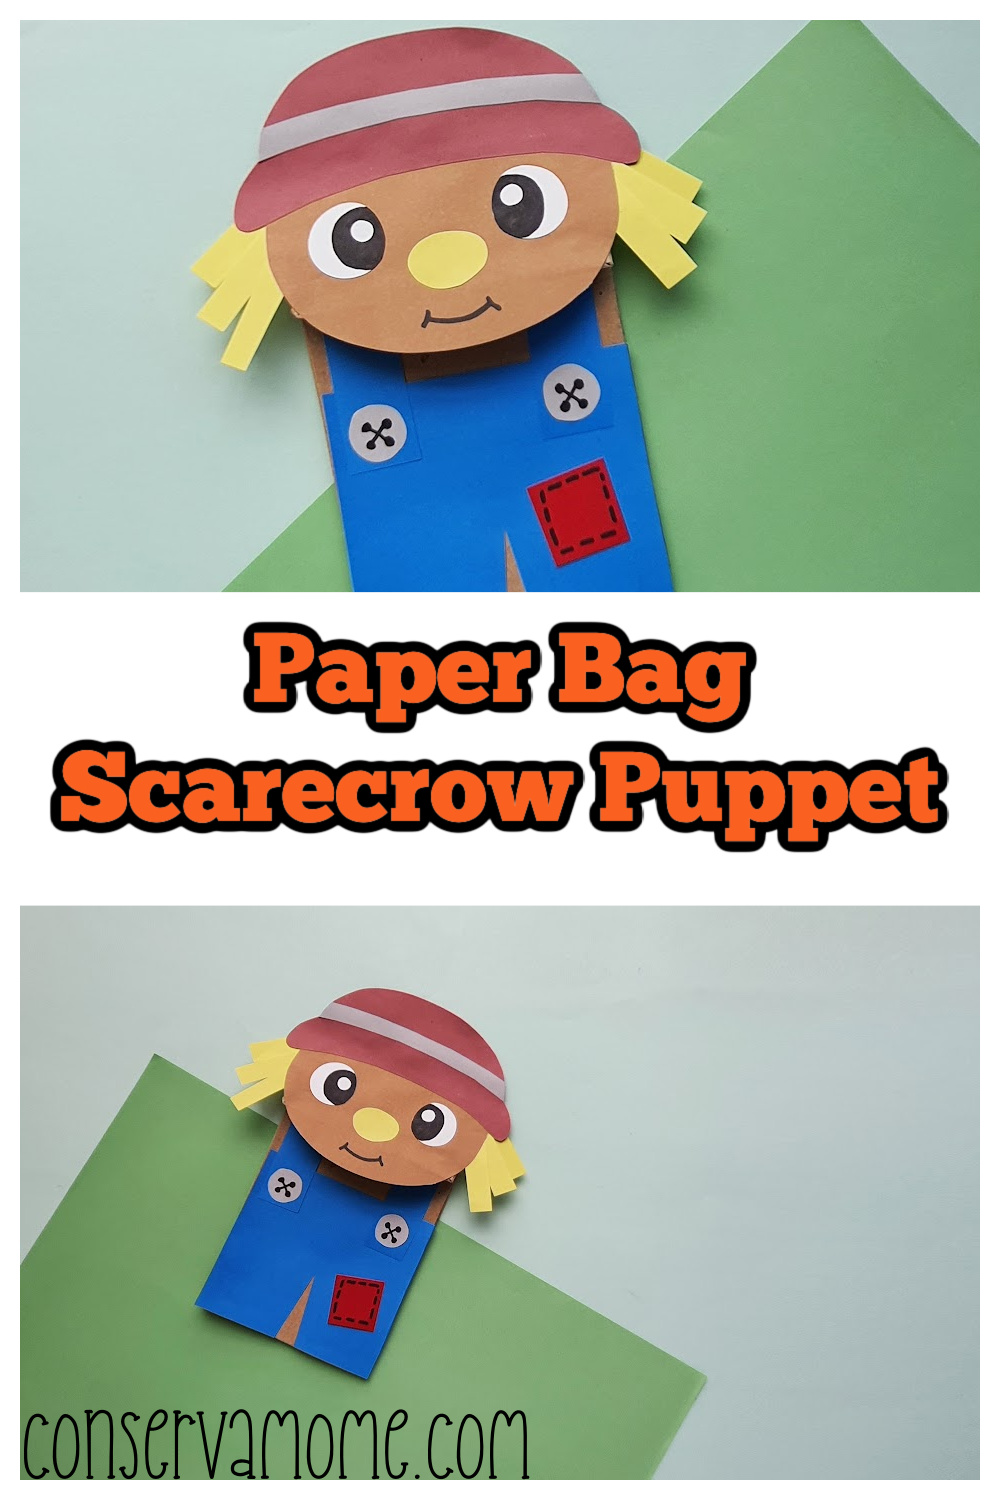 Scarecrow Paper Bag Craft  Scarecrow Craft for Fall or Halloween